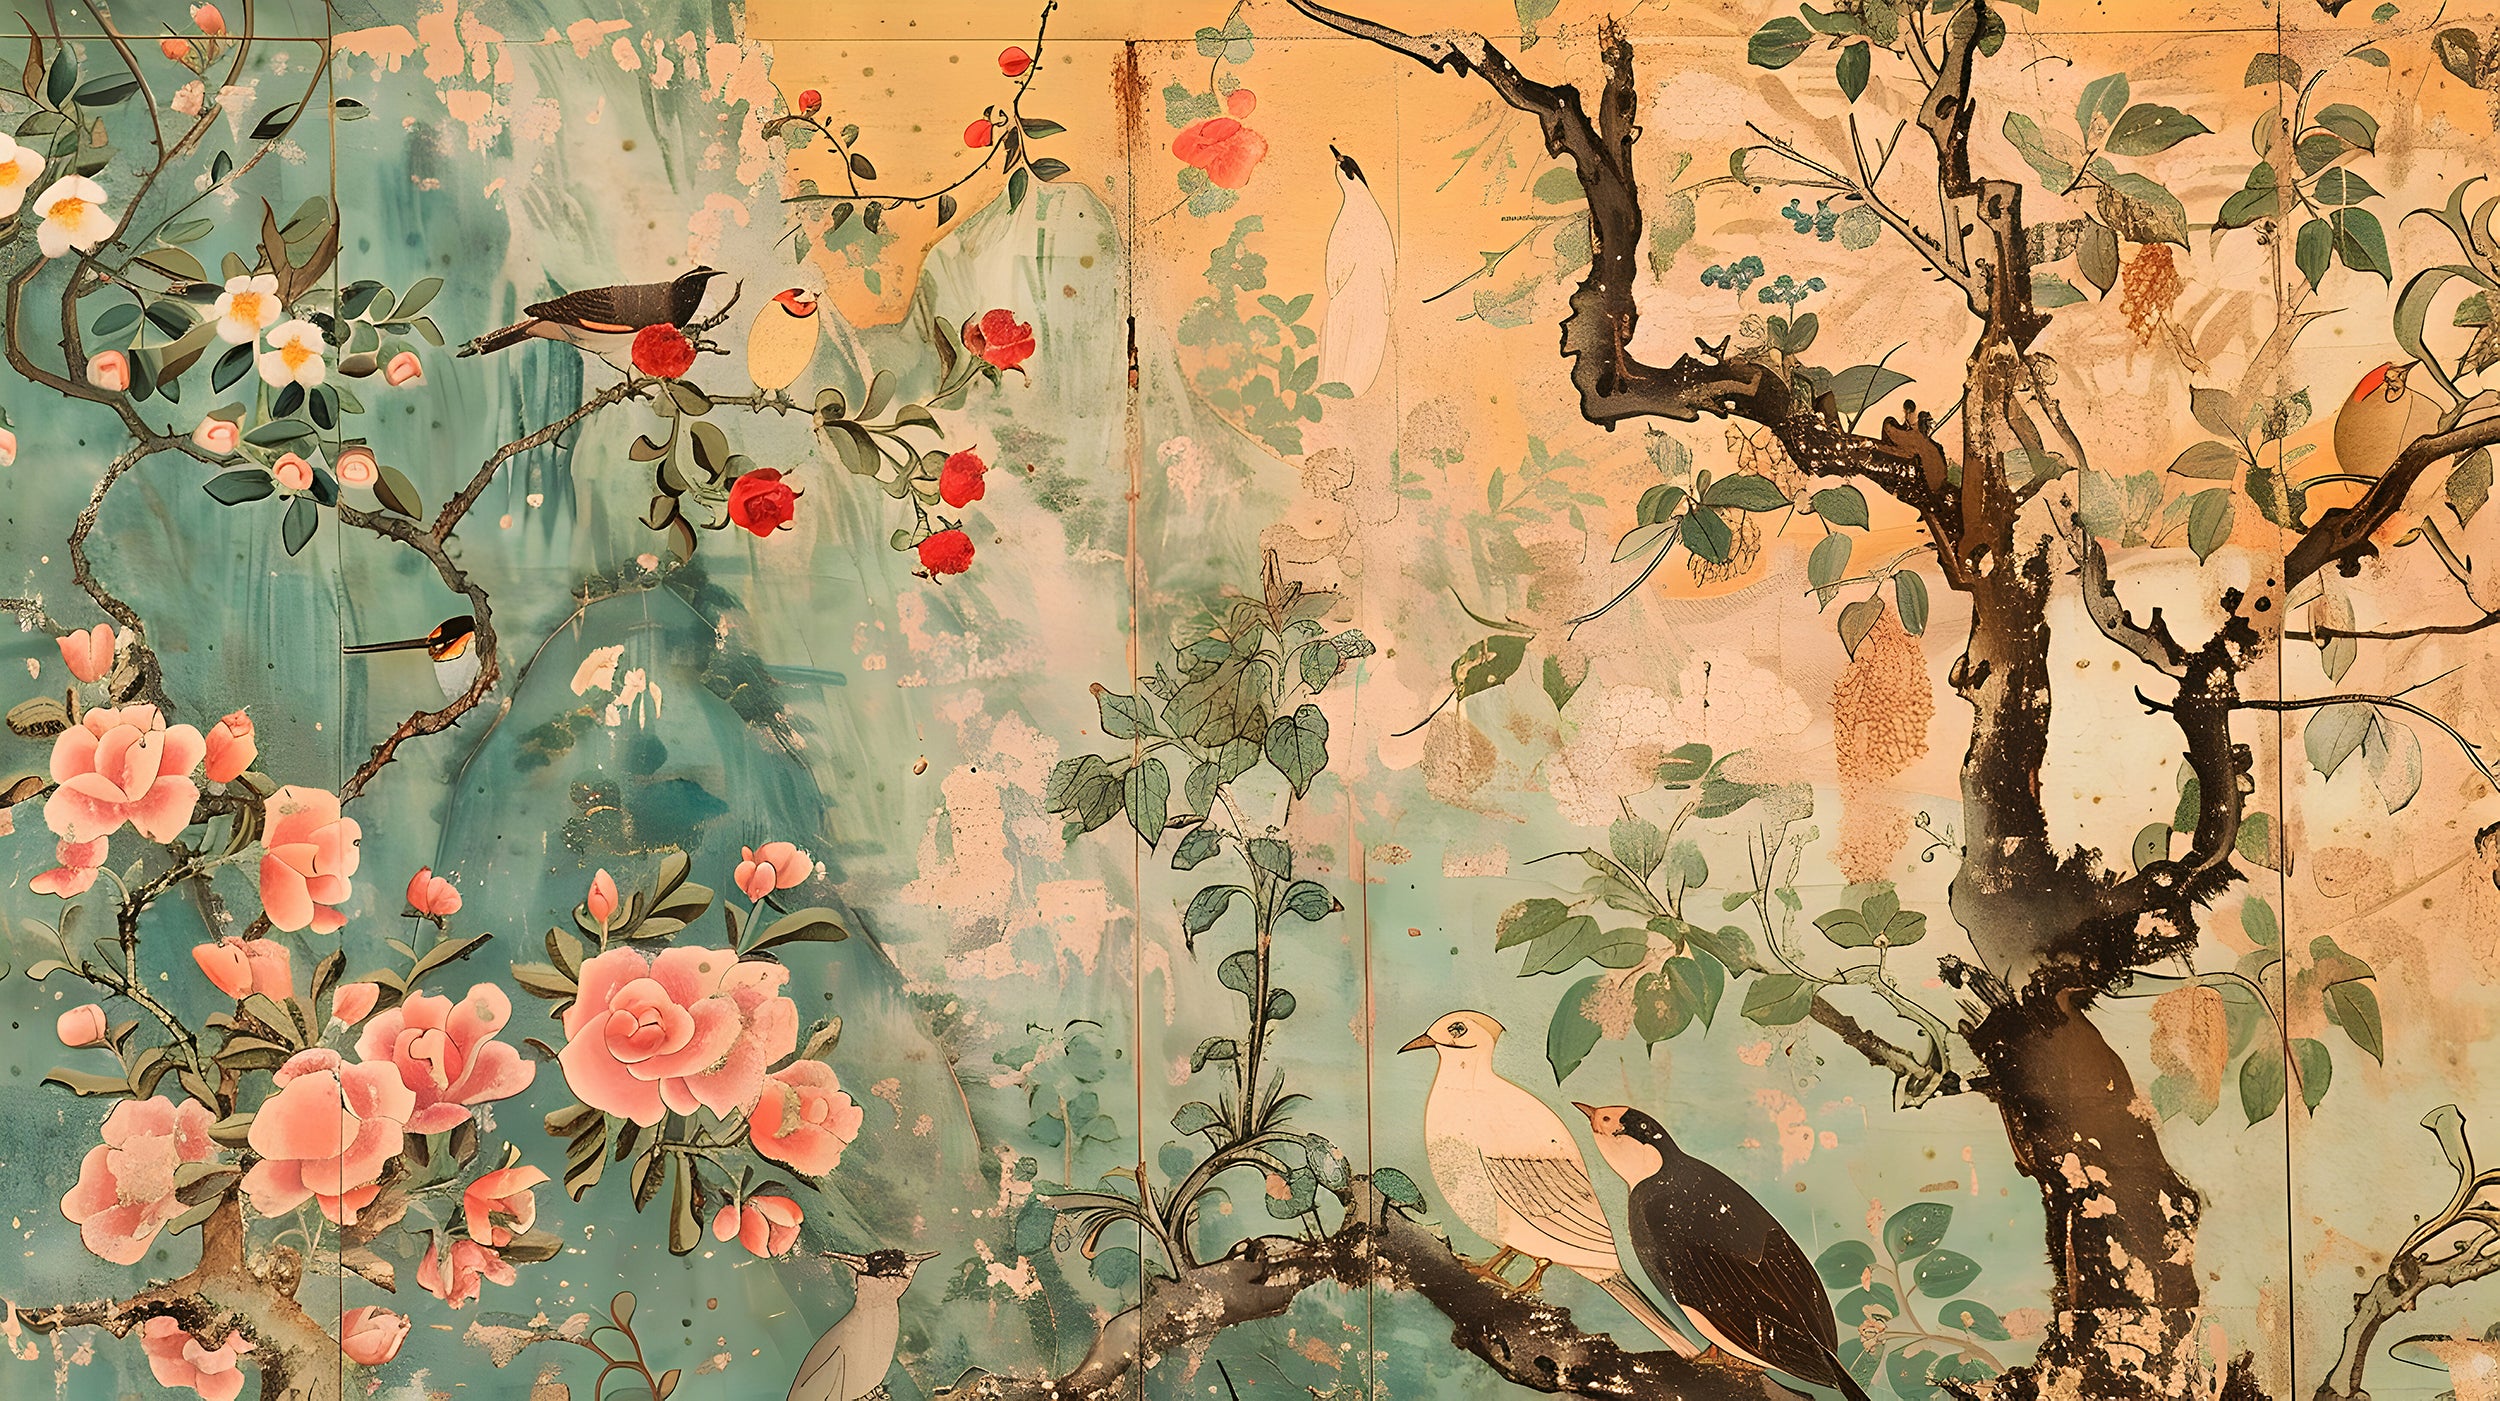 Peel and stick Japanese wallpaper Removable birds flowers and tree wall decor